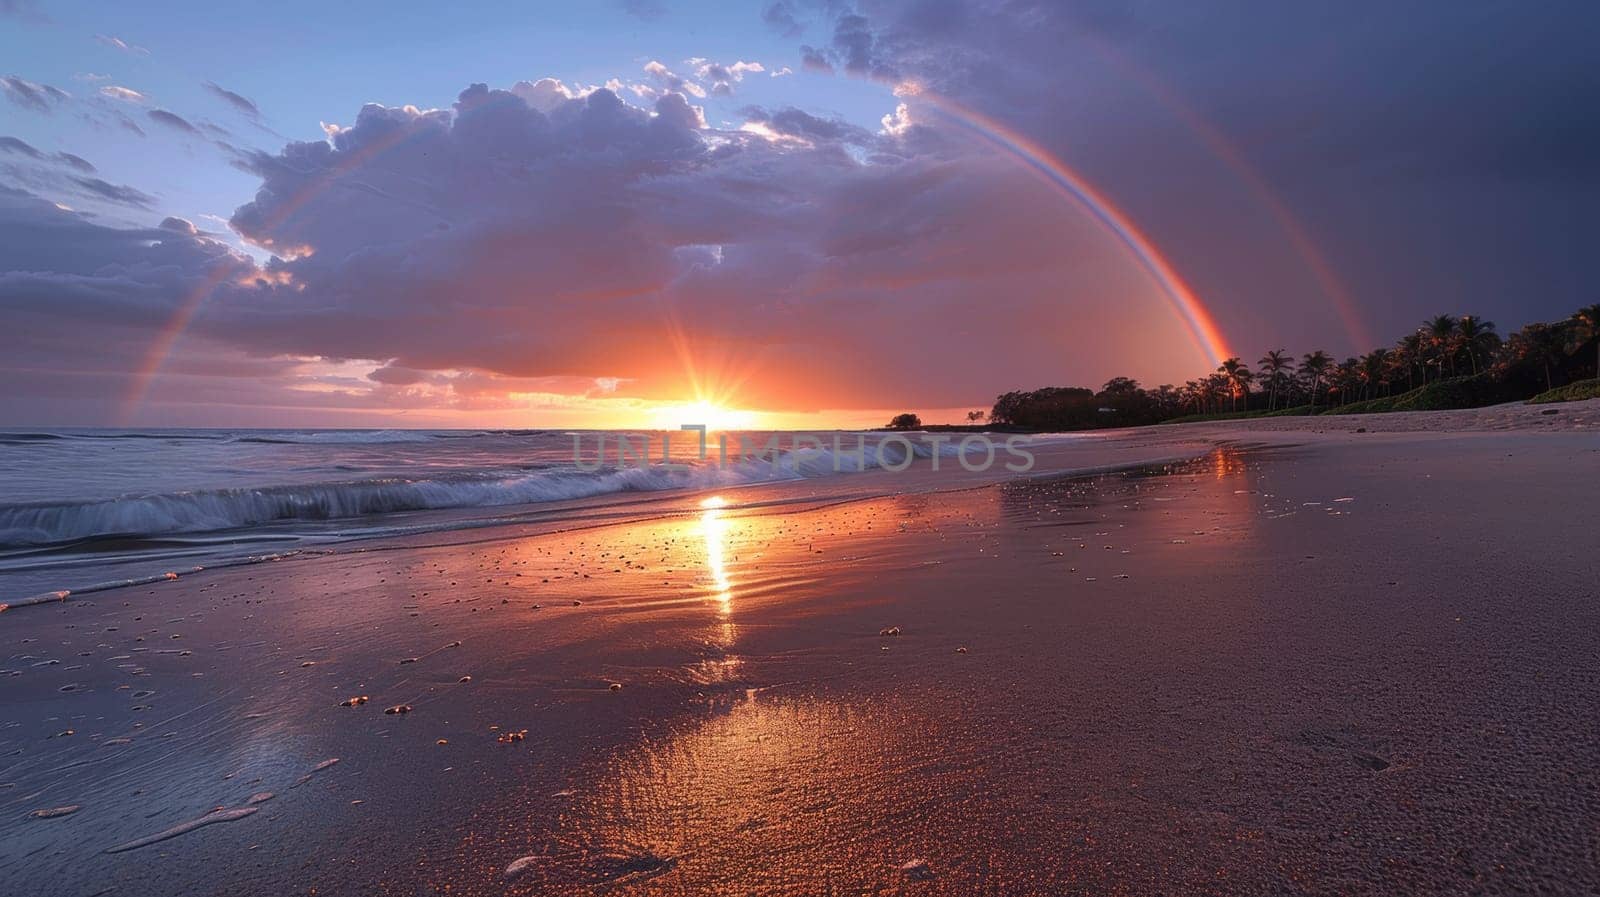 A double rainbow over the ocean at sunset on a beach, AI by starush